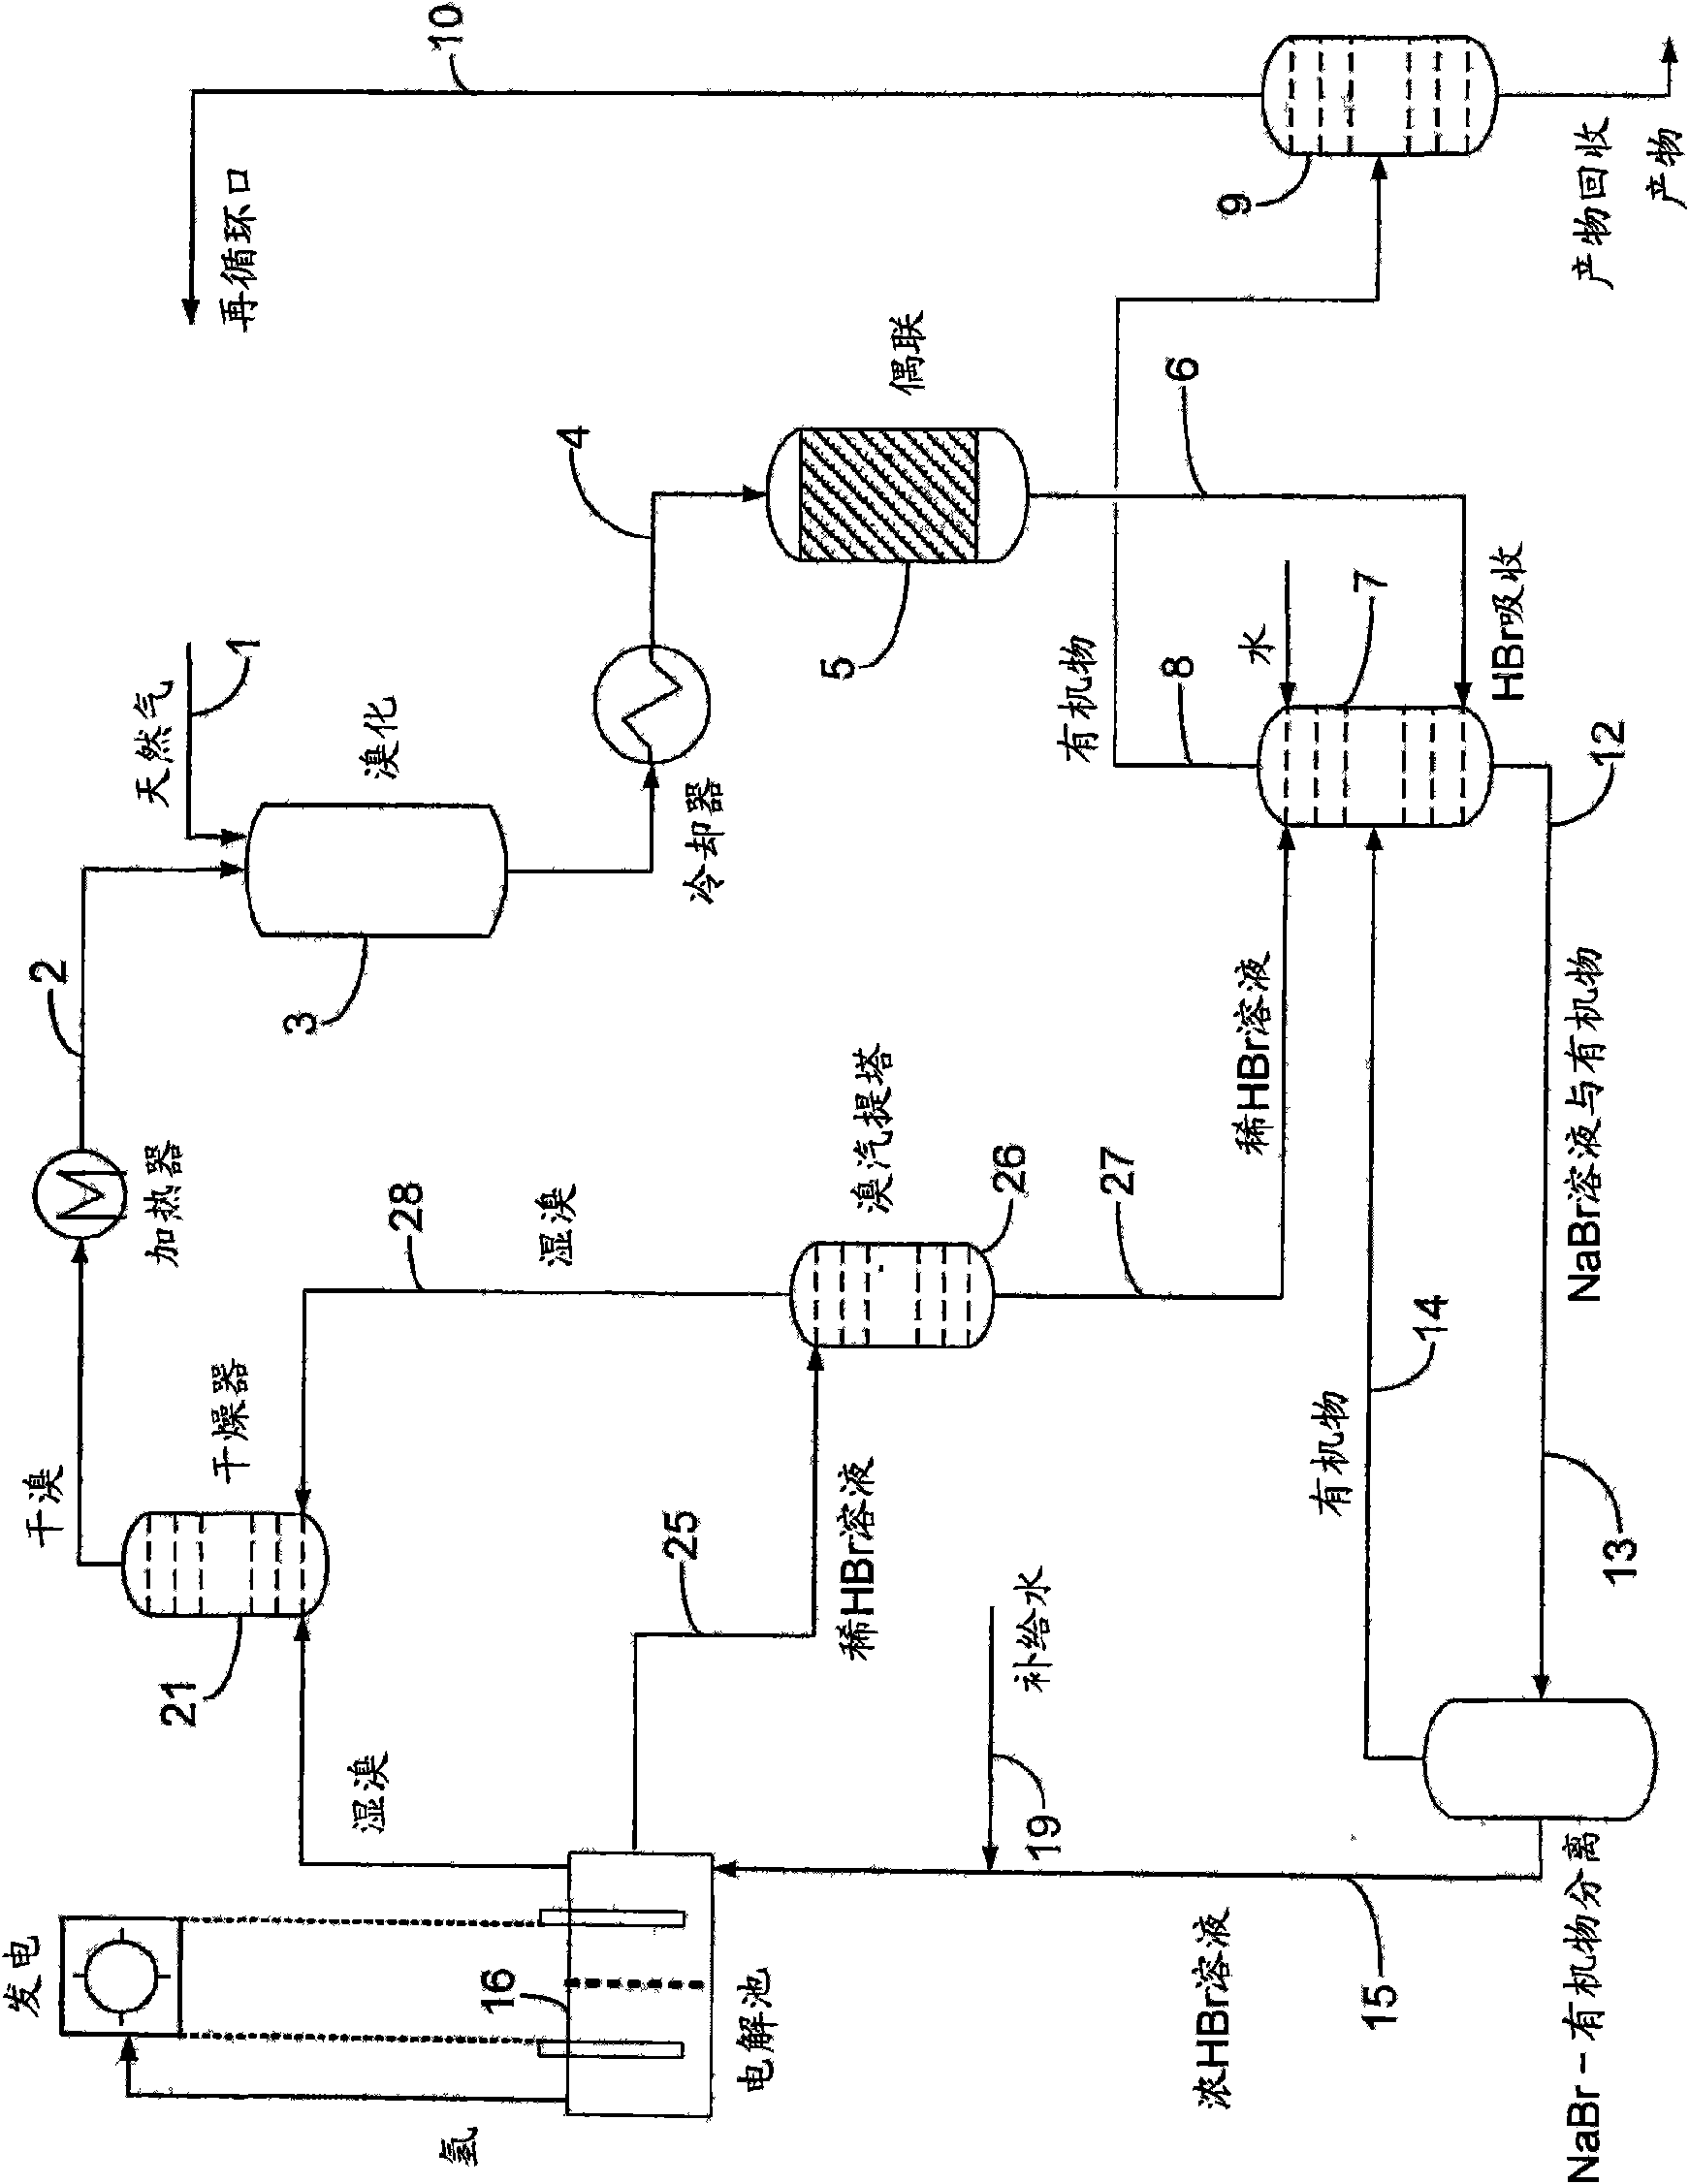 Process for converting hydrocarbon feedstocks with electrolytic recovery of halogen